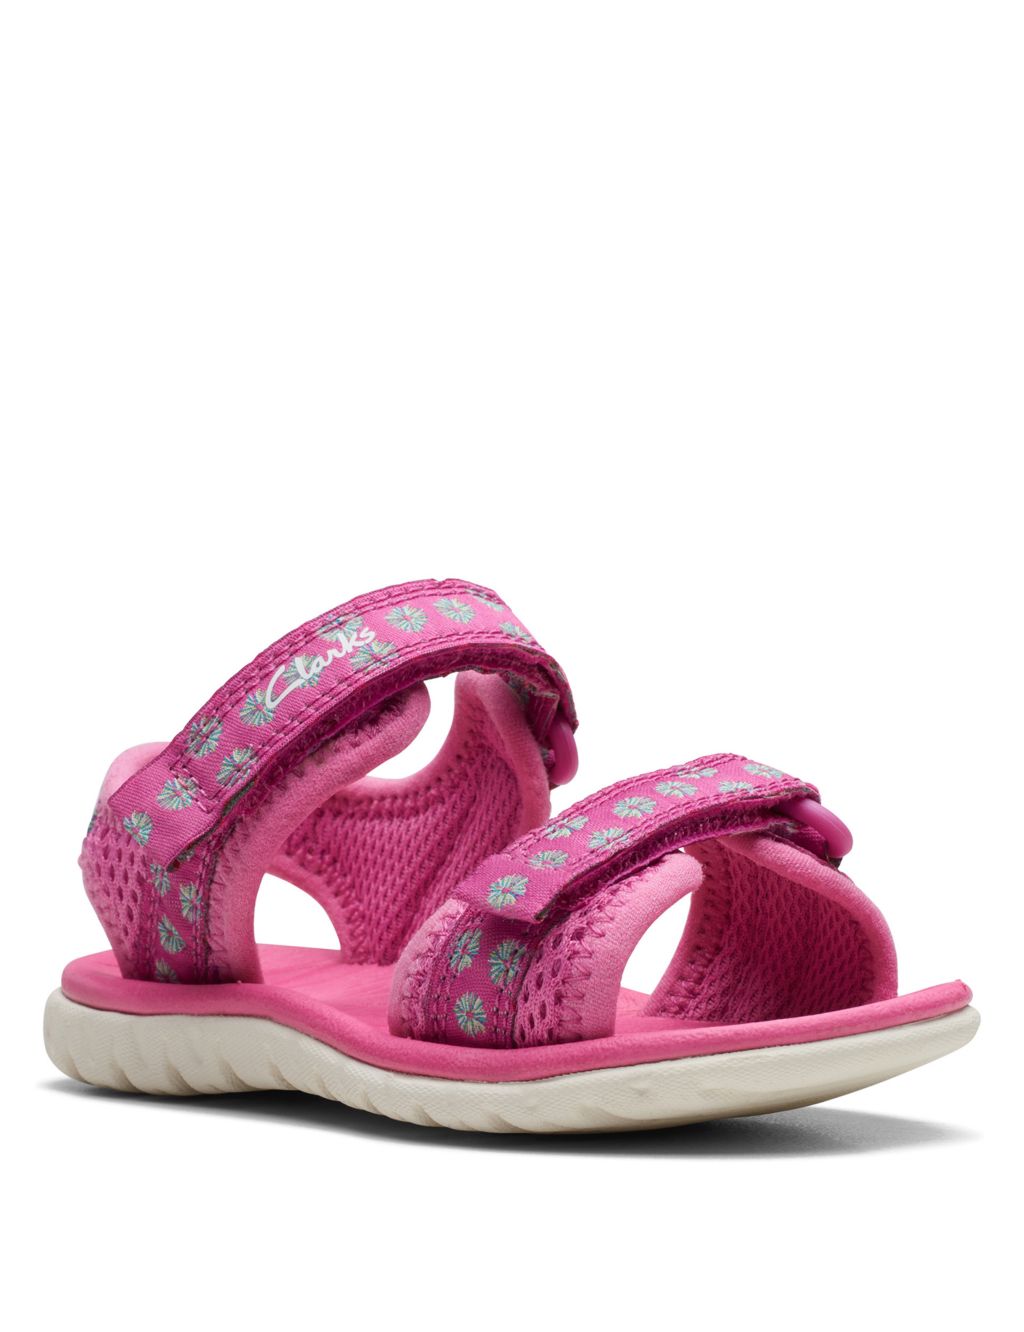 Kids' Floral Riptape Sandals (4 Small - 6½ Small) image 2